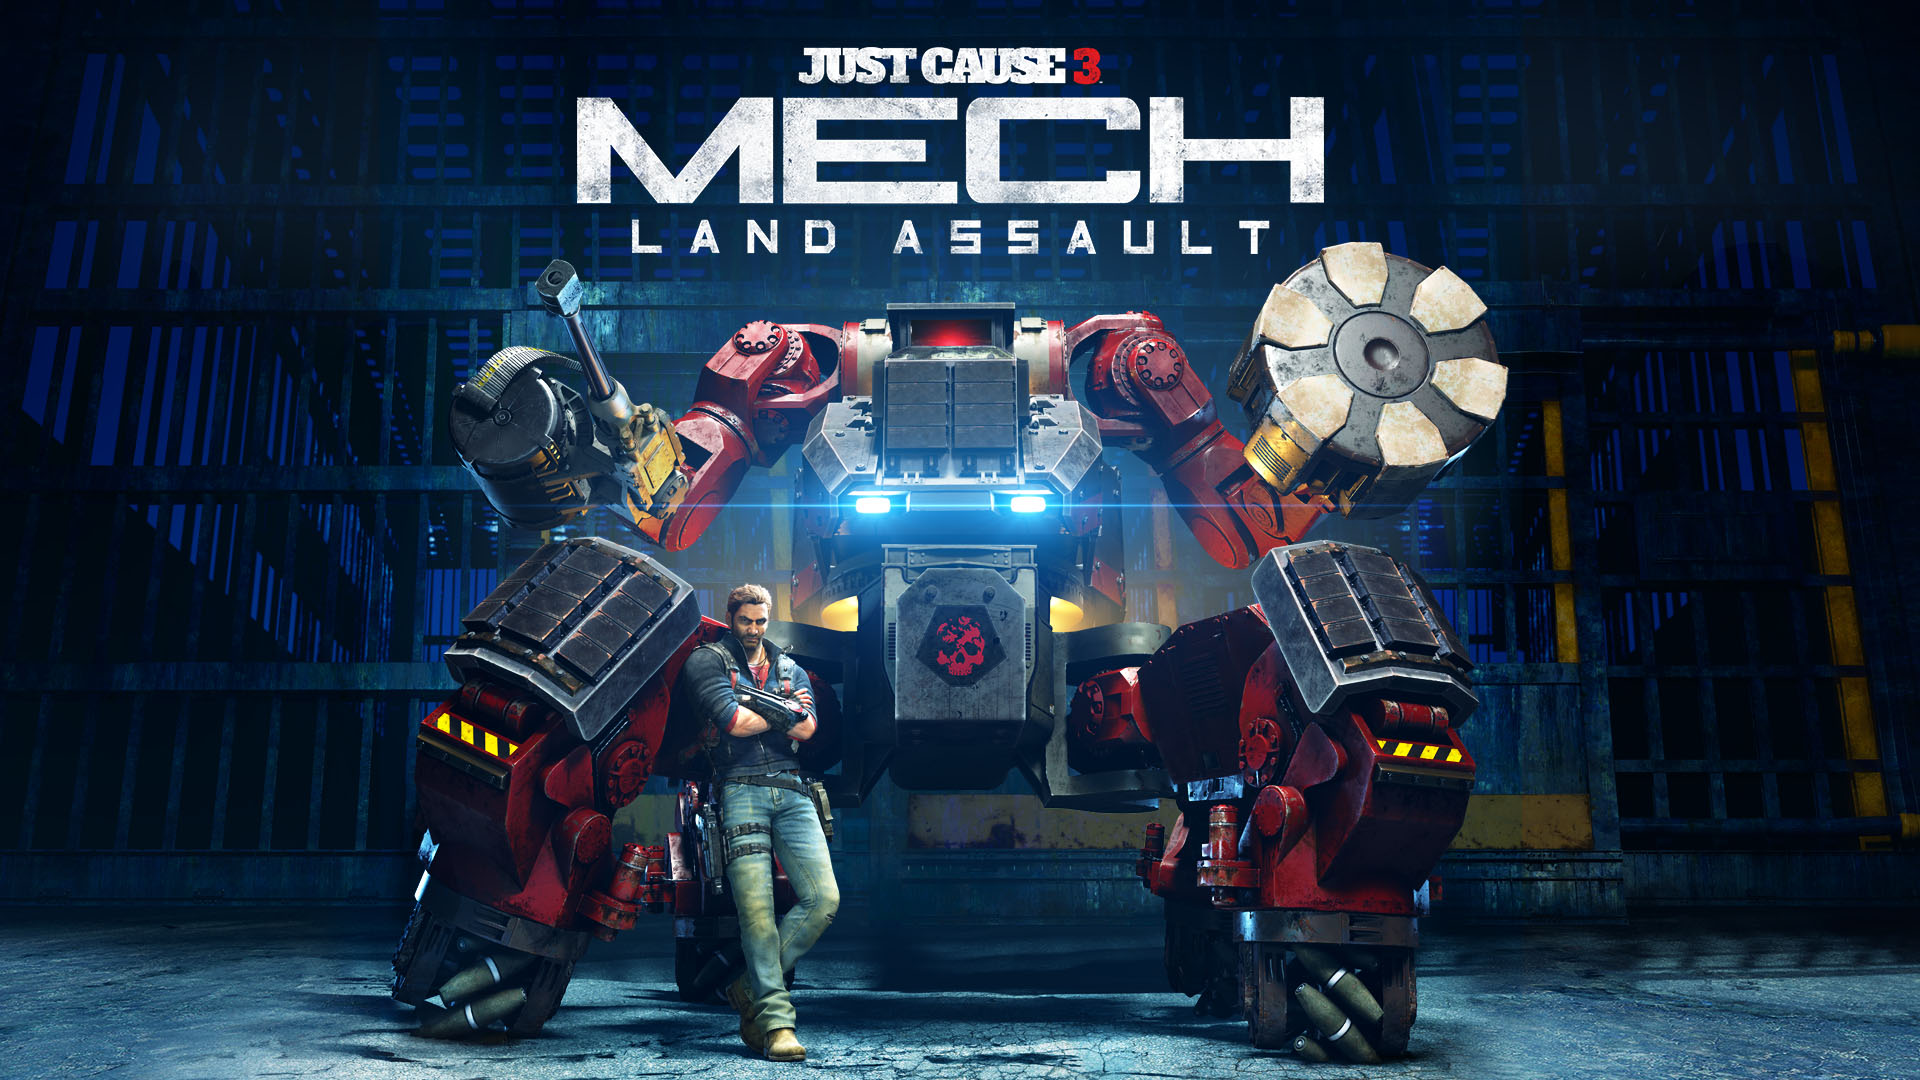 CHECK OUT THE '90s ANIME INSPIRED TRAILER FOR 'JUST CAUSE 3: MECH LAND  ASSAULT' – Action A Go Go, LLC